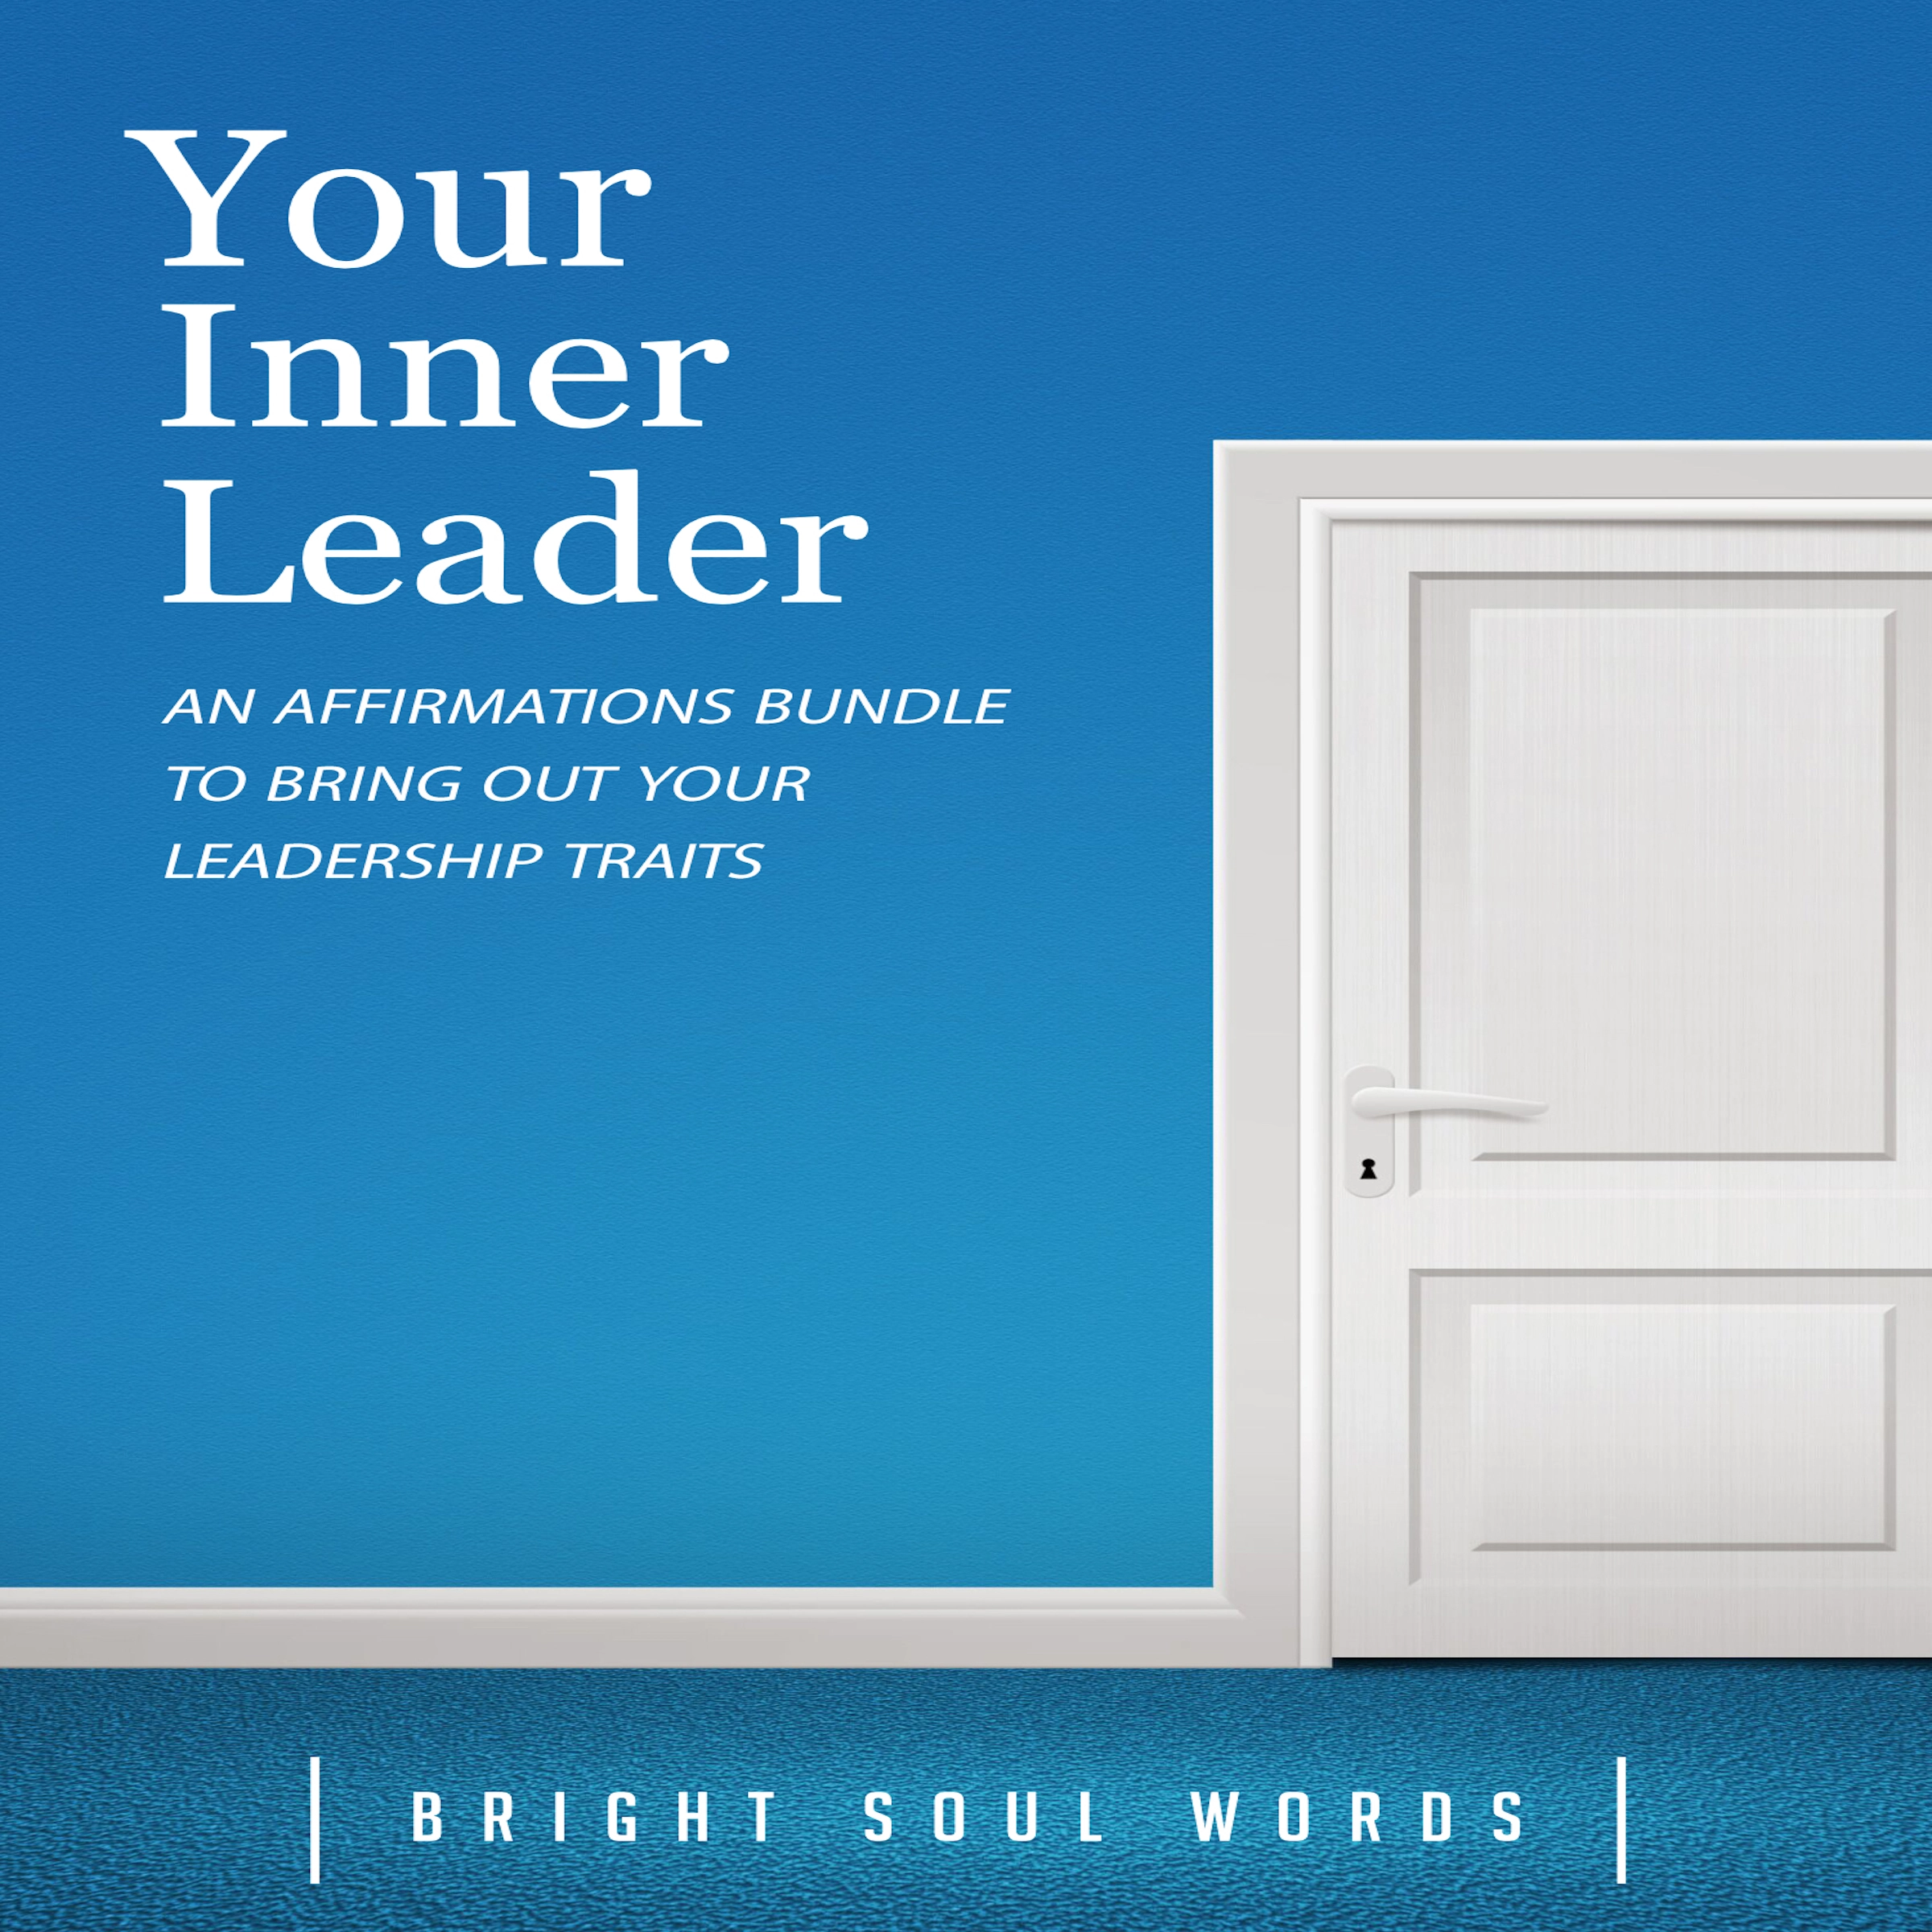 Your Inner Leader: An Affirmations Bundle to Bring Out Your Leadership Traits Audiobook by Bright Soul Words